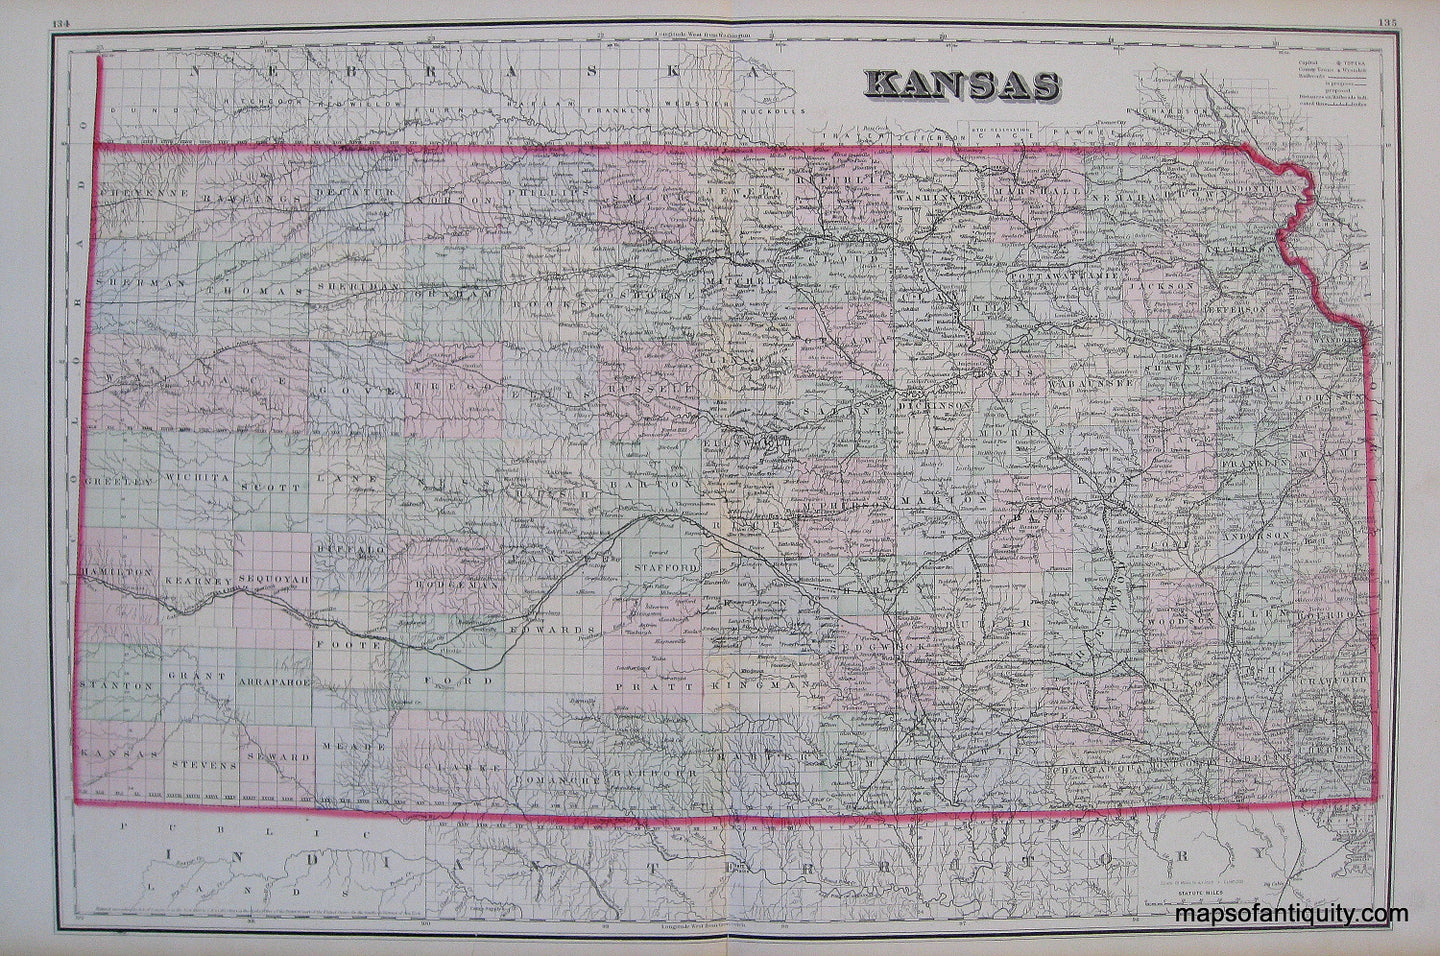 Antique-Hand-Colored-Map-Kansas-Midwest-Kansas-1881-Gray-Maps-Of-Antiquity